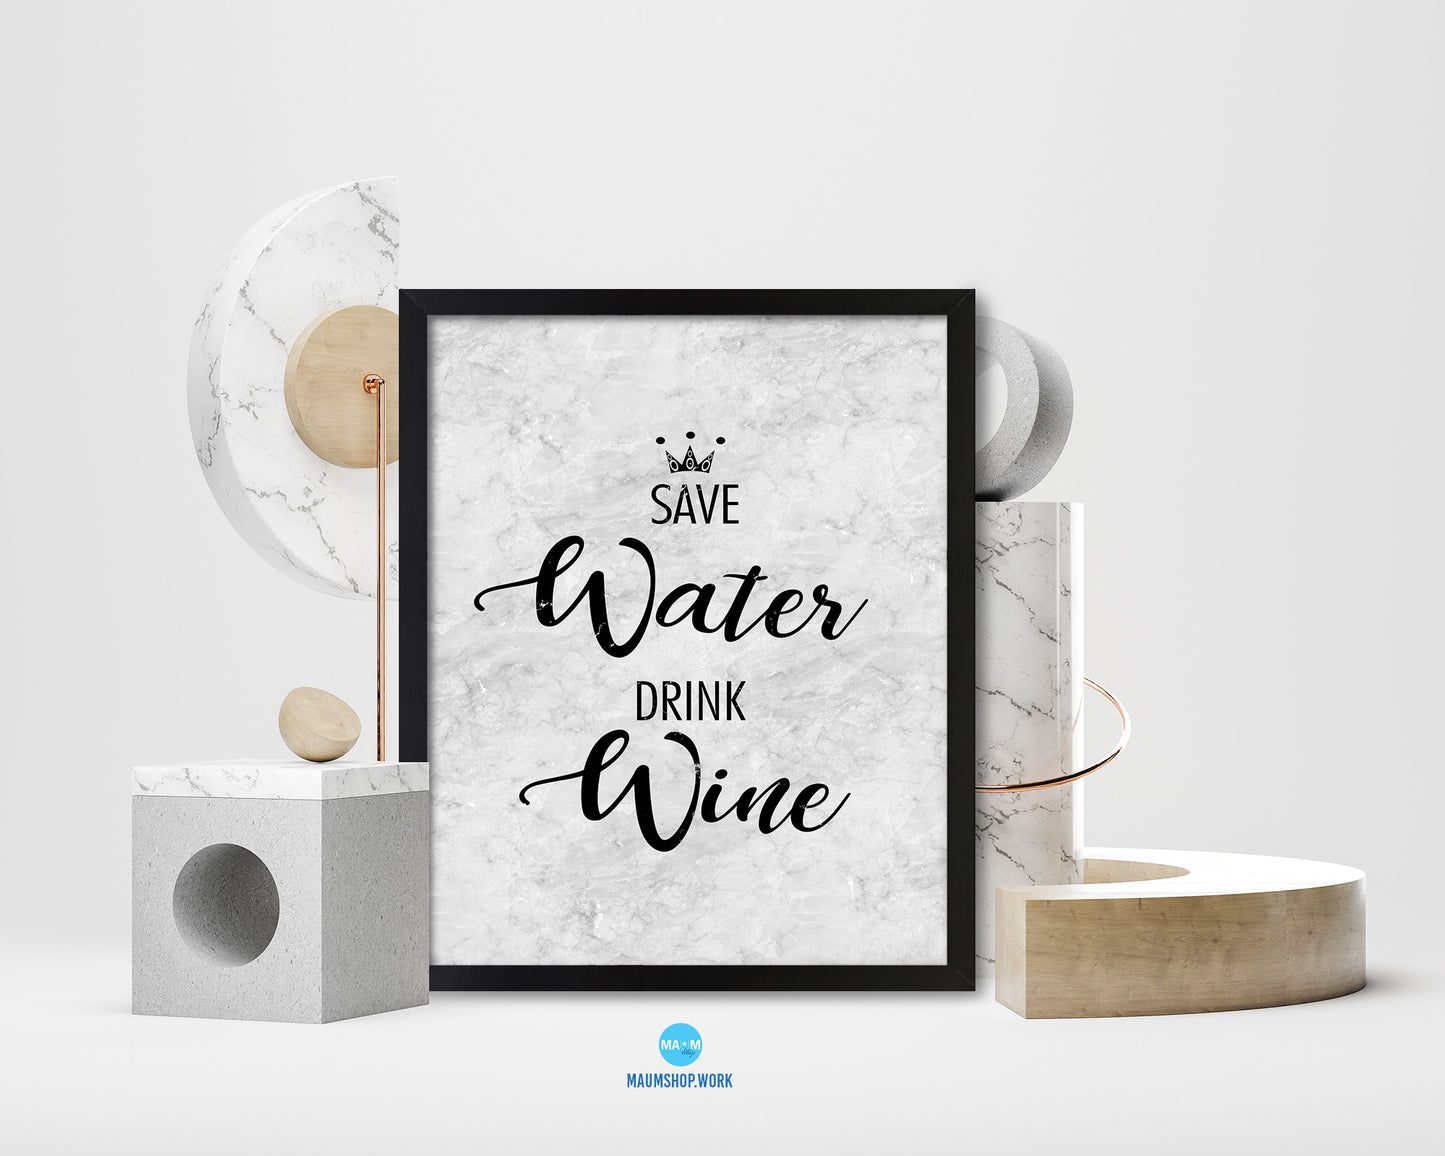 Save water drink wine Quote Framed Print Wall Art Decor Gifts